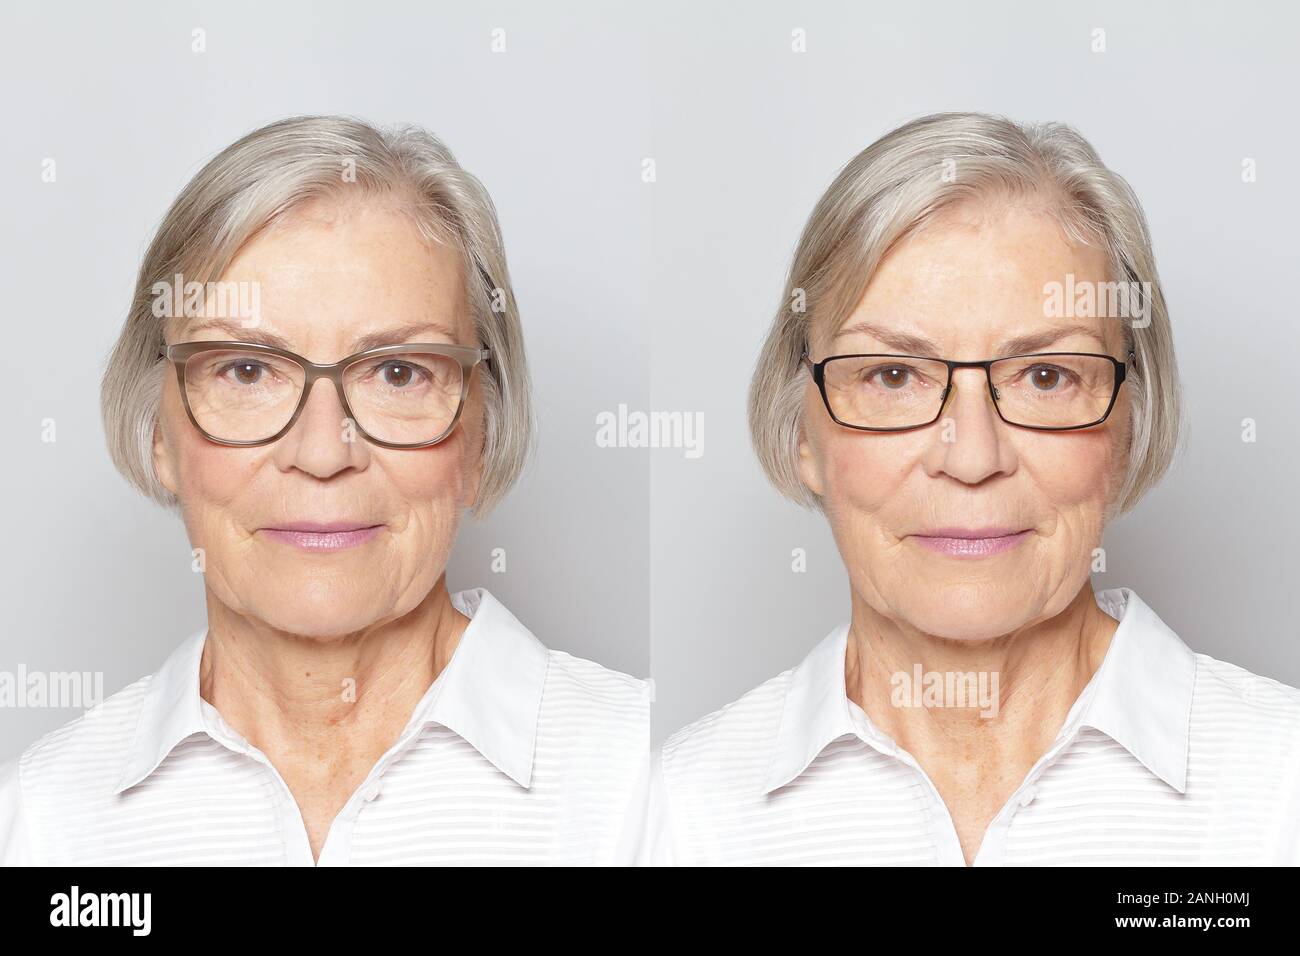 Shopping eyeglasses online with try-on feature: photo of a senior woman with two different frames. Stock Photo